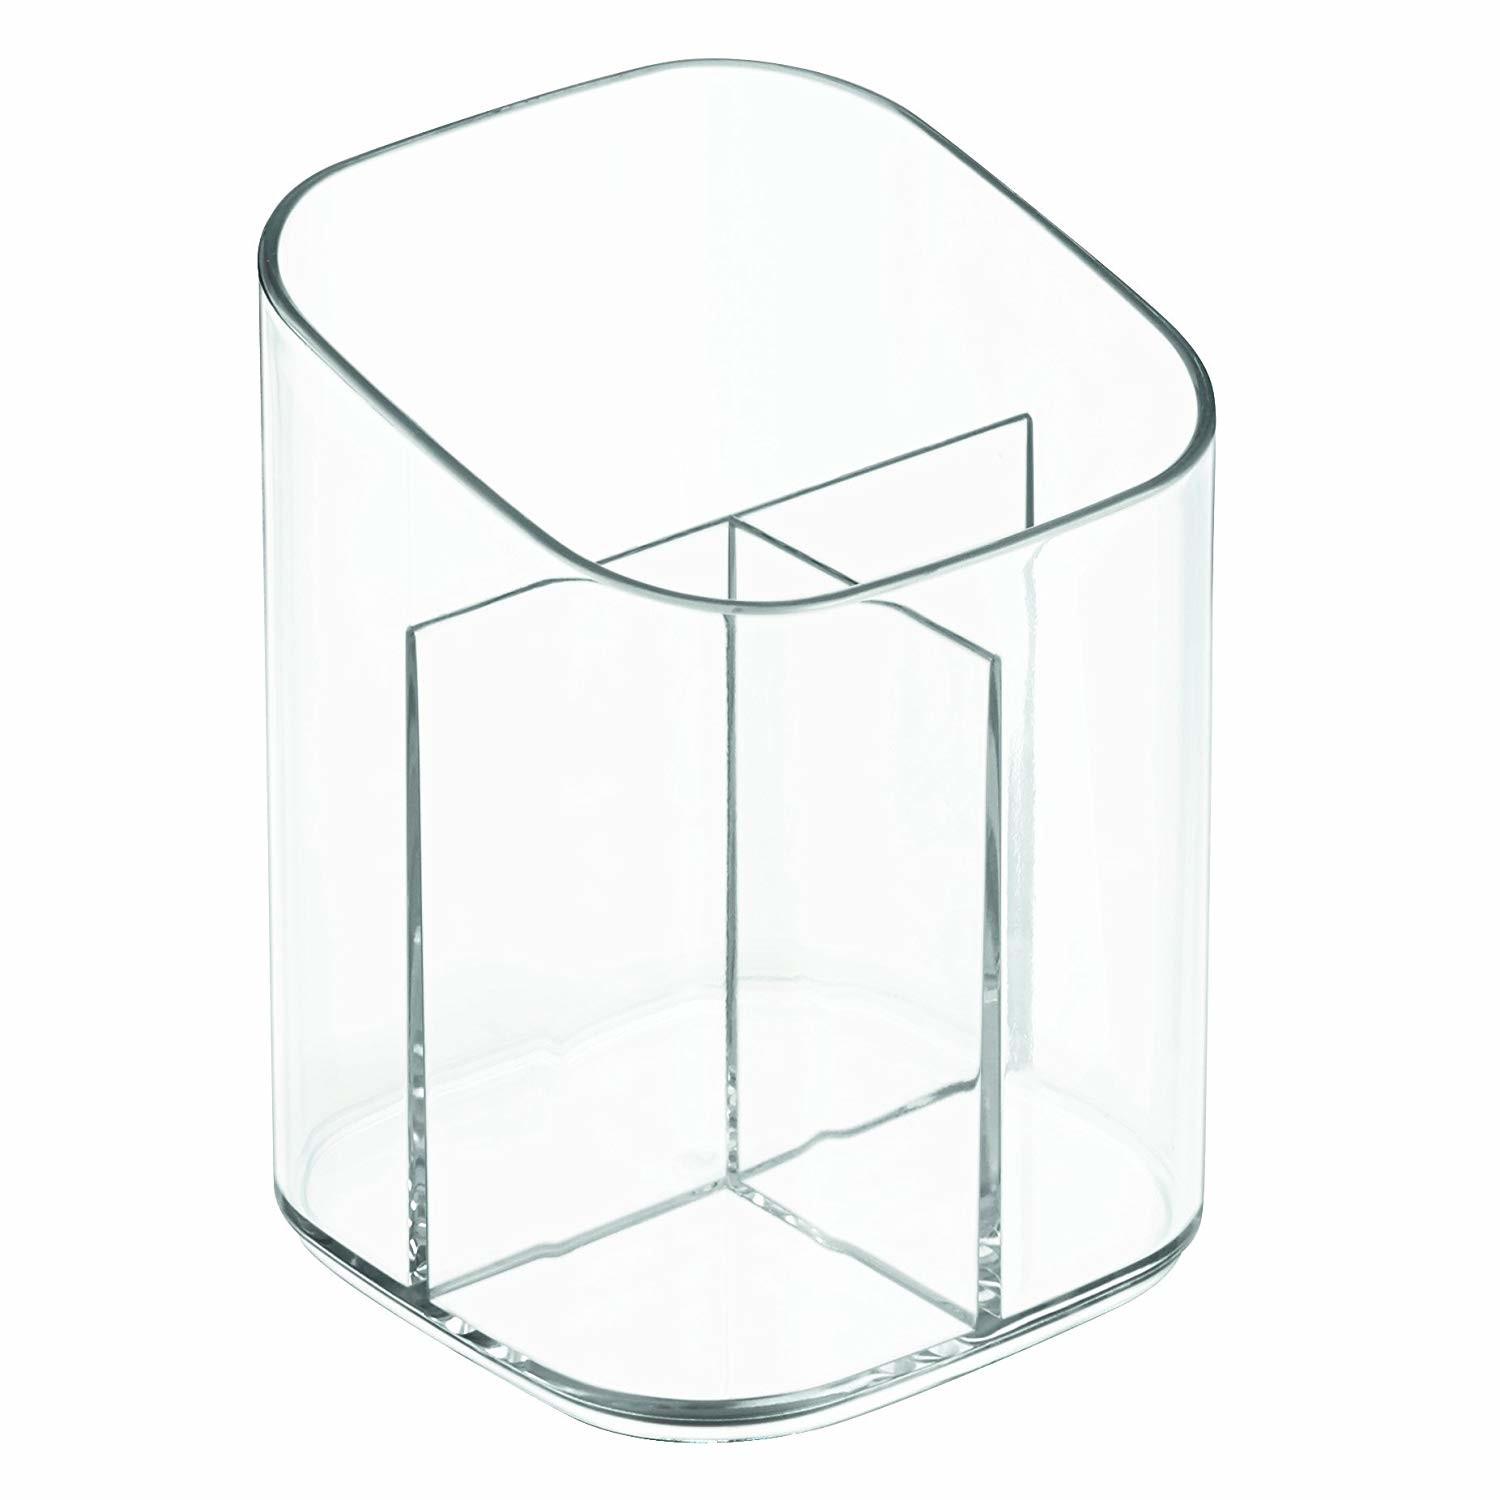  Stackable PMMA Acrylic Display Box Makeup Brush Holder Cup Bathroom Accessories Manufactures